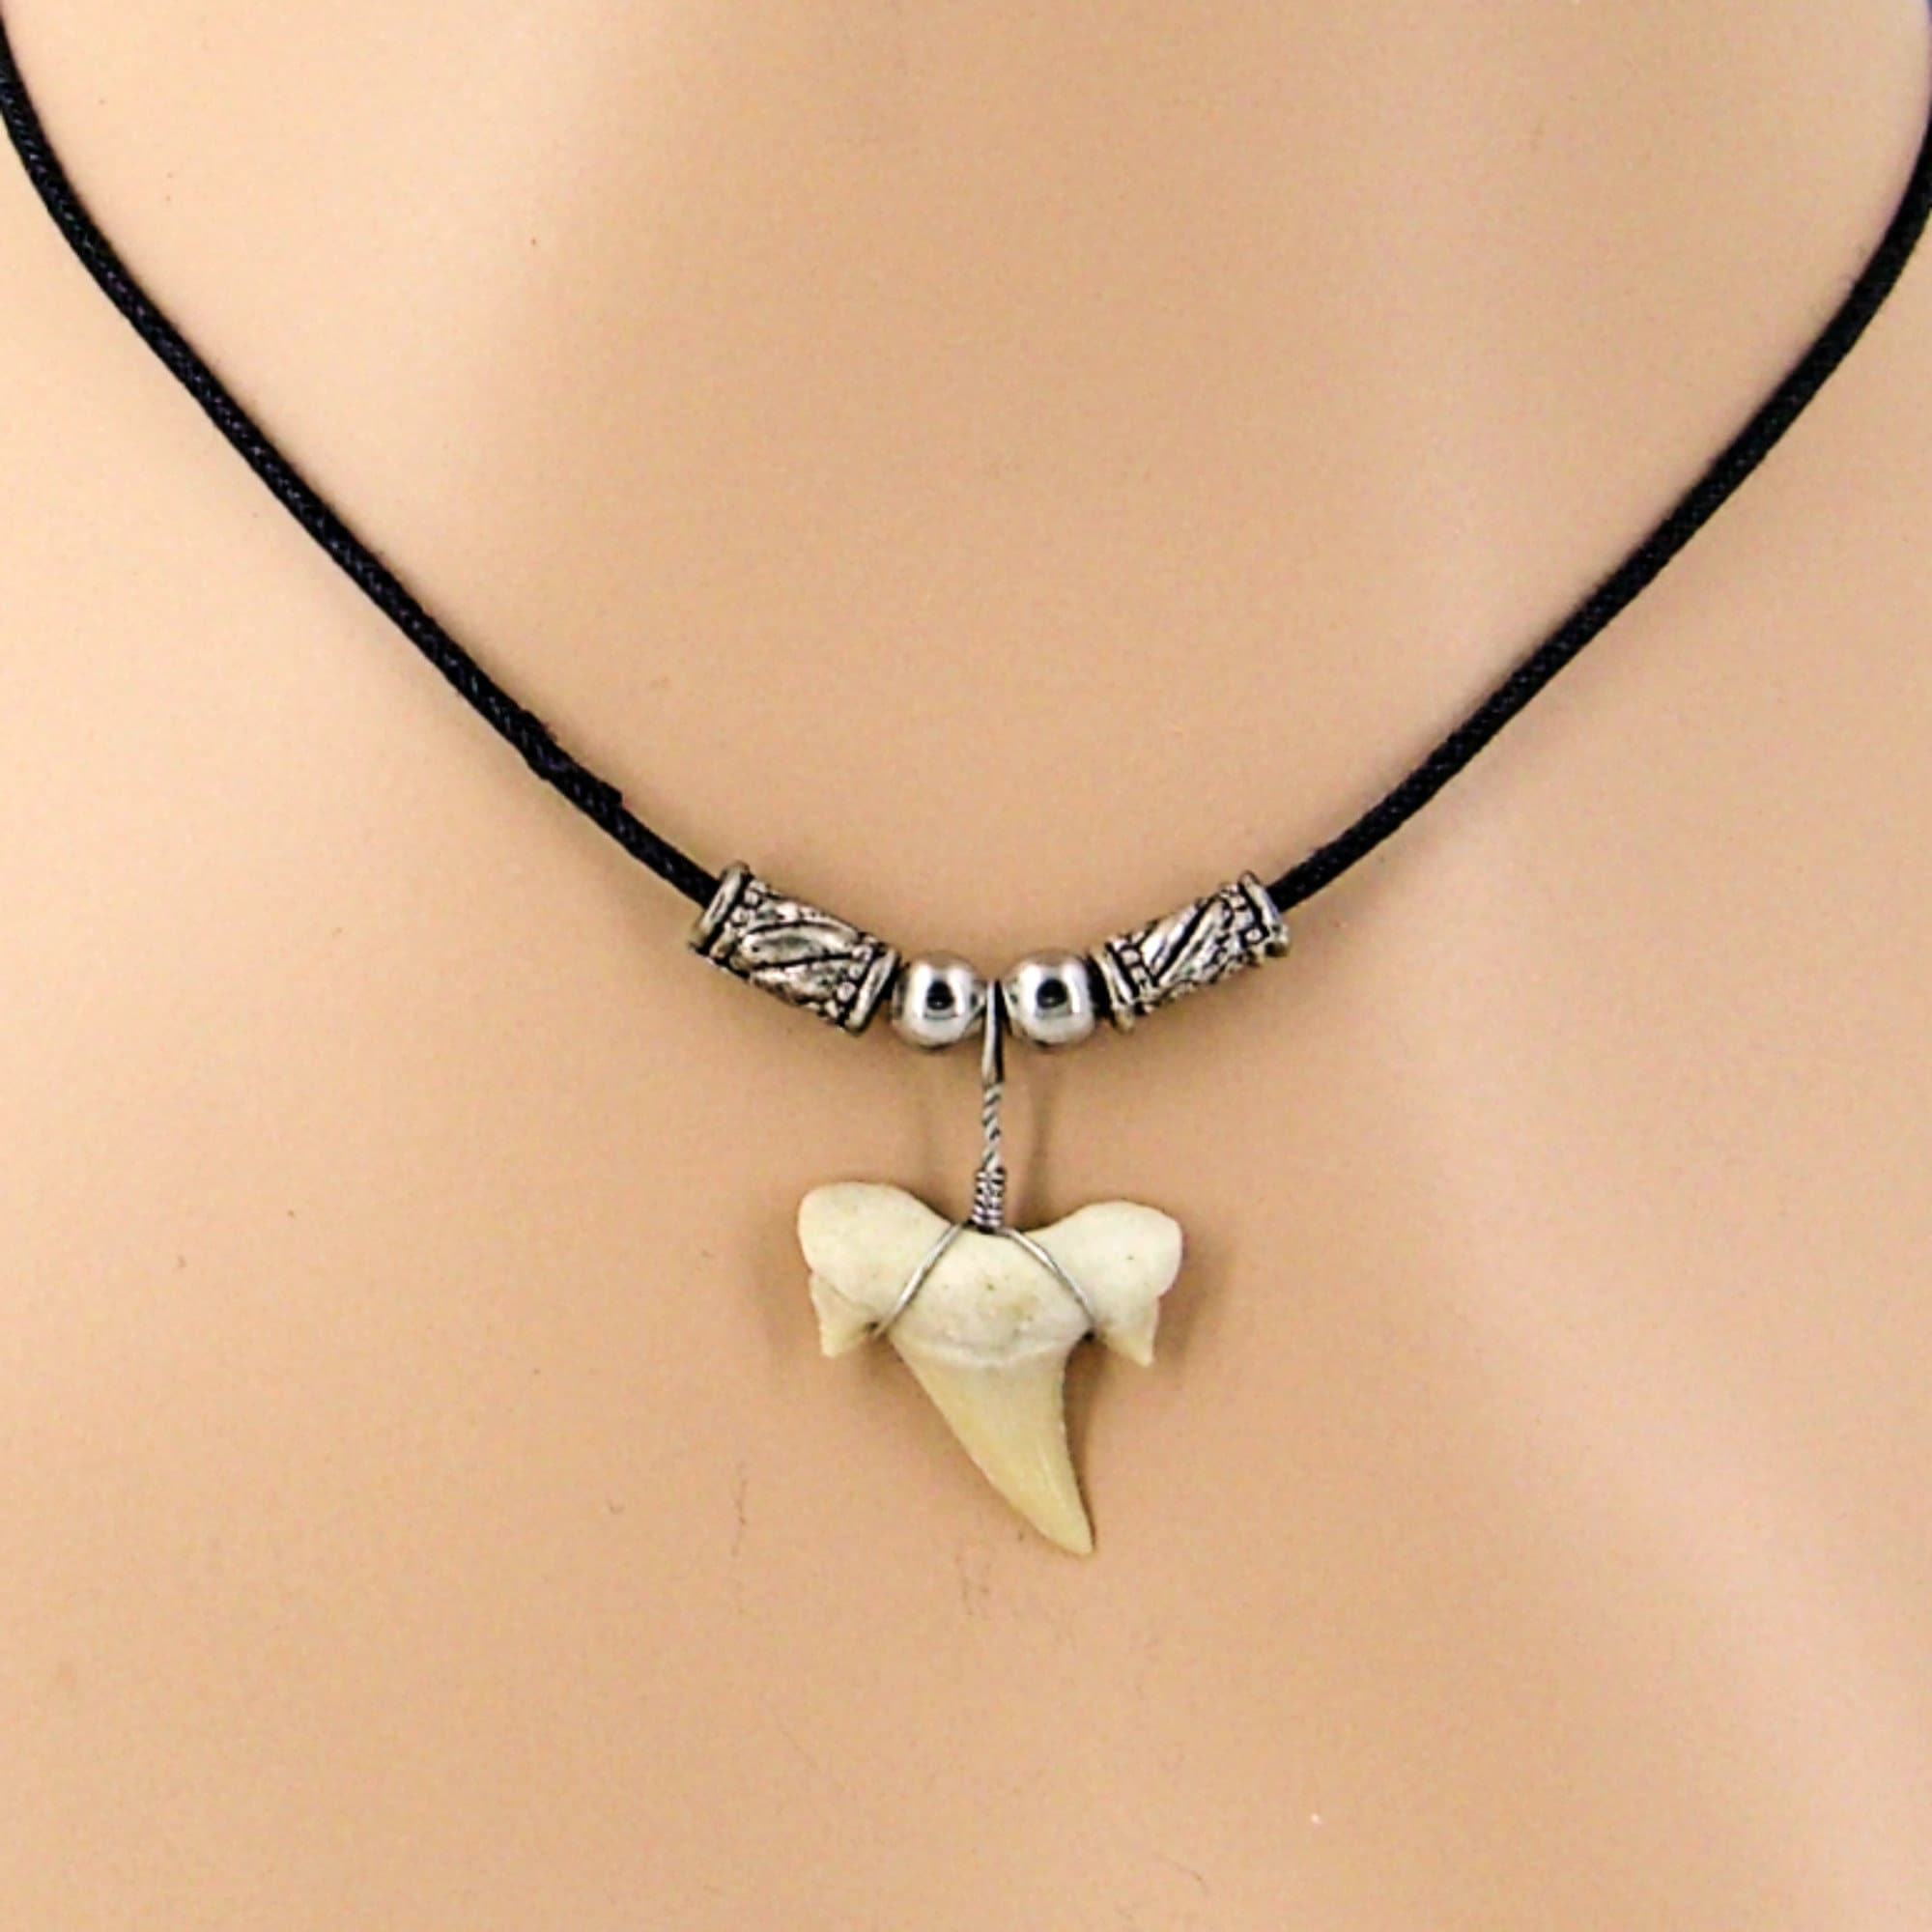 pendants shark tooth 25 wire wrapped Squalicorax fossil Shark teeth necklace 